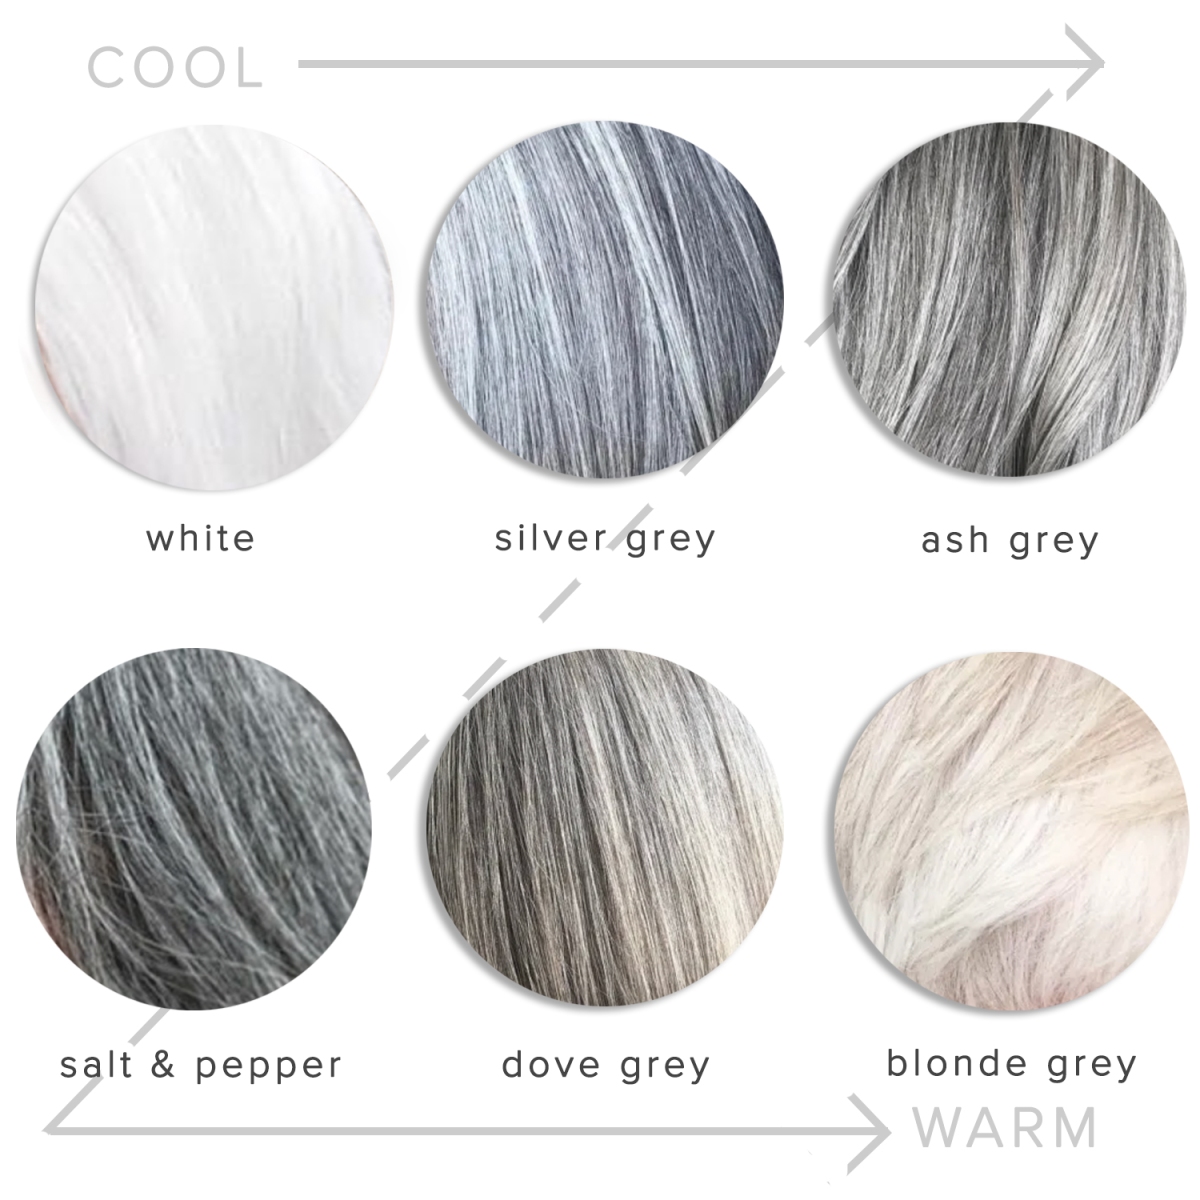 grey hair colour chart grey hair color hair color chart - image result ...